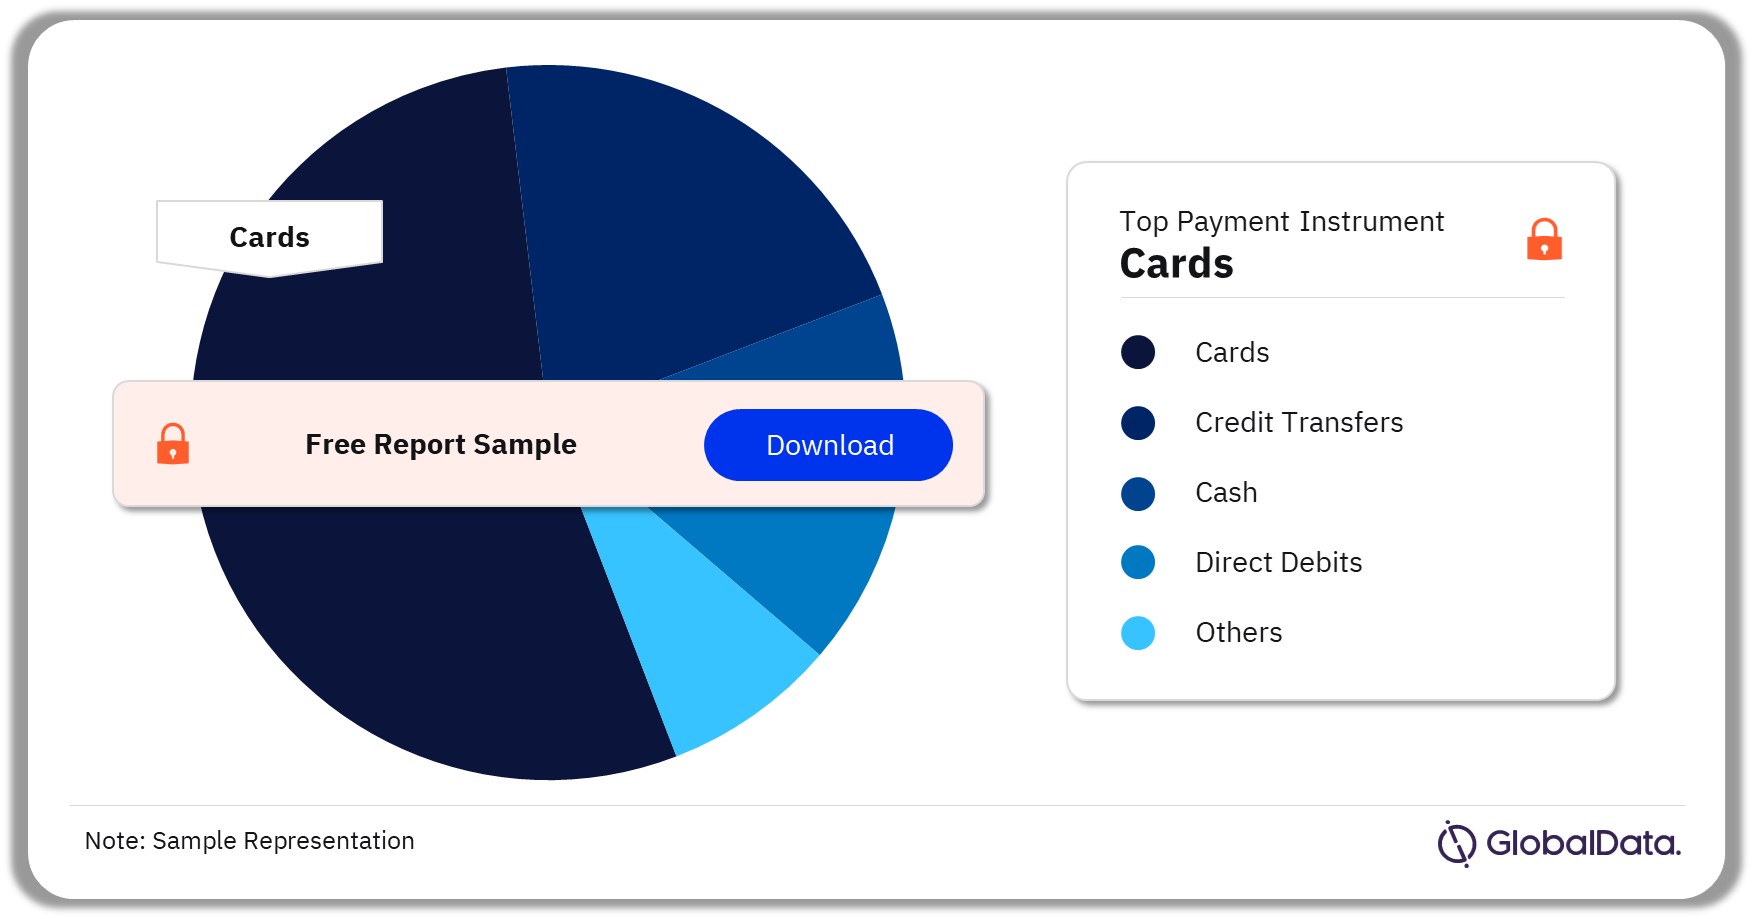 Switzerland Cards and Payments Market Analysis by Payment Instruments (Volume Terms), 2023 (%)